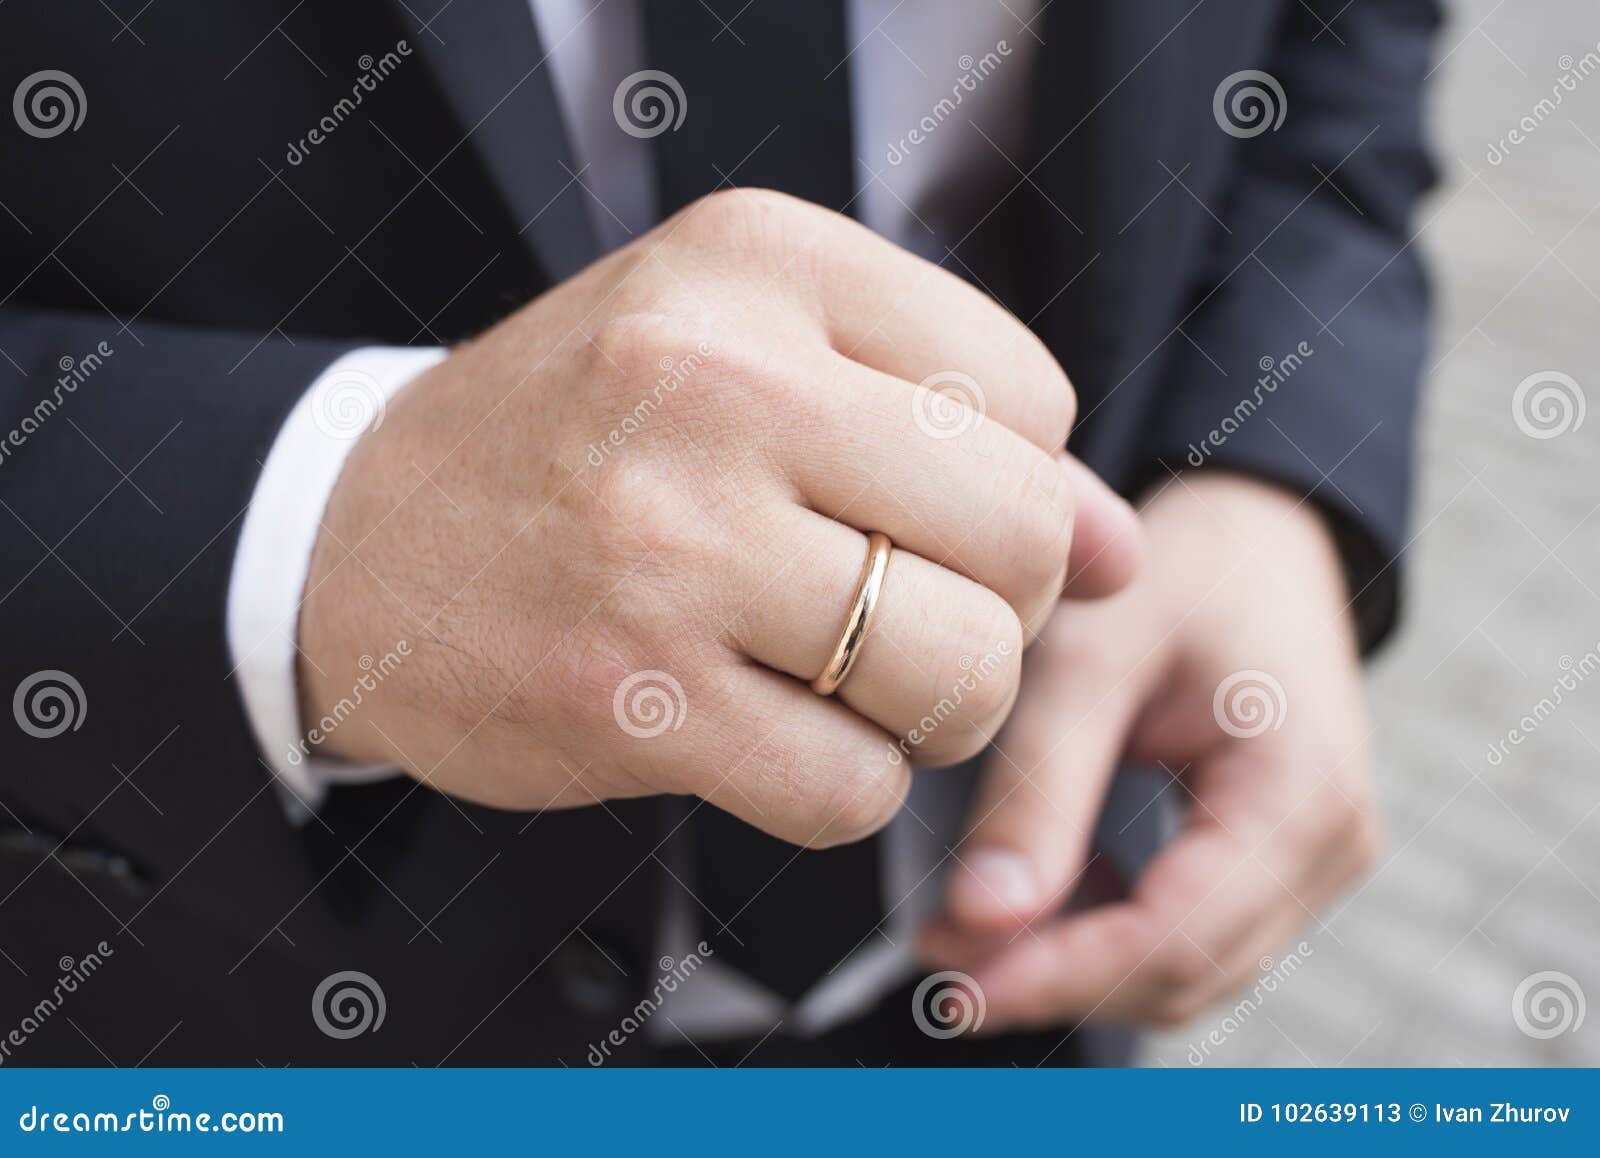 Which Finger Does a Men's Wedding Ring Go On? - ItsHot